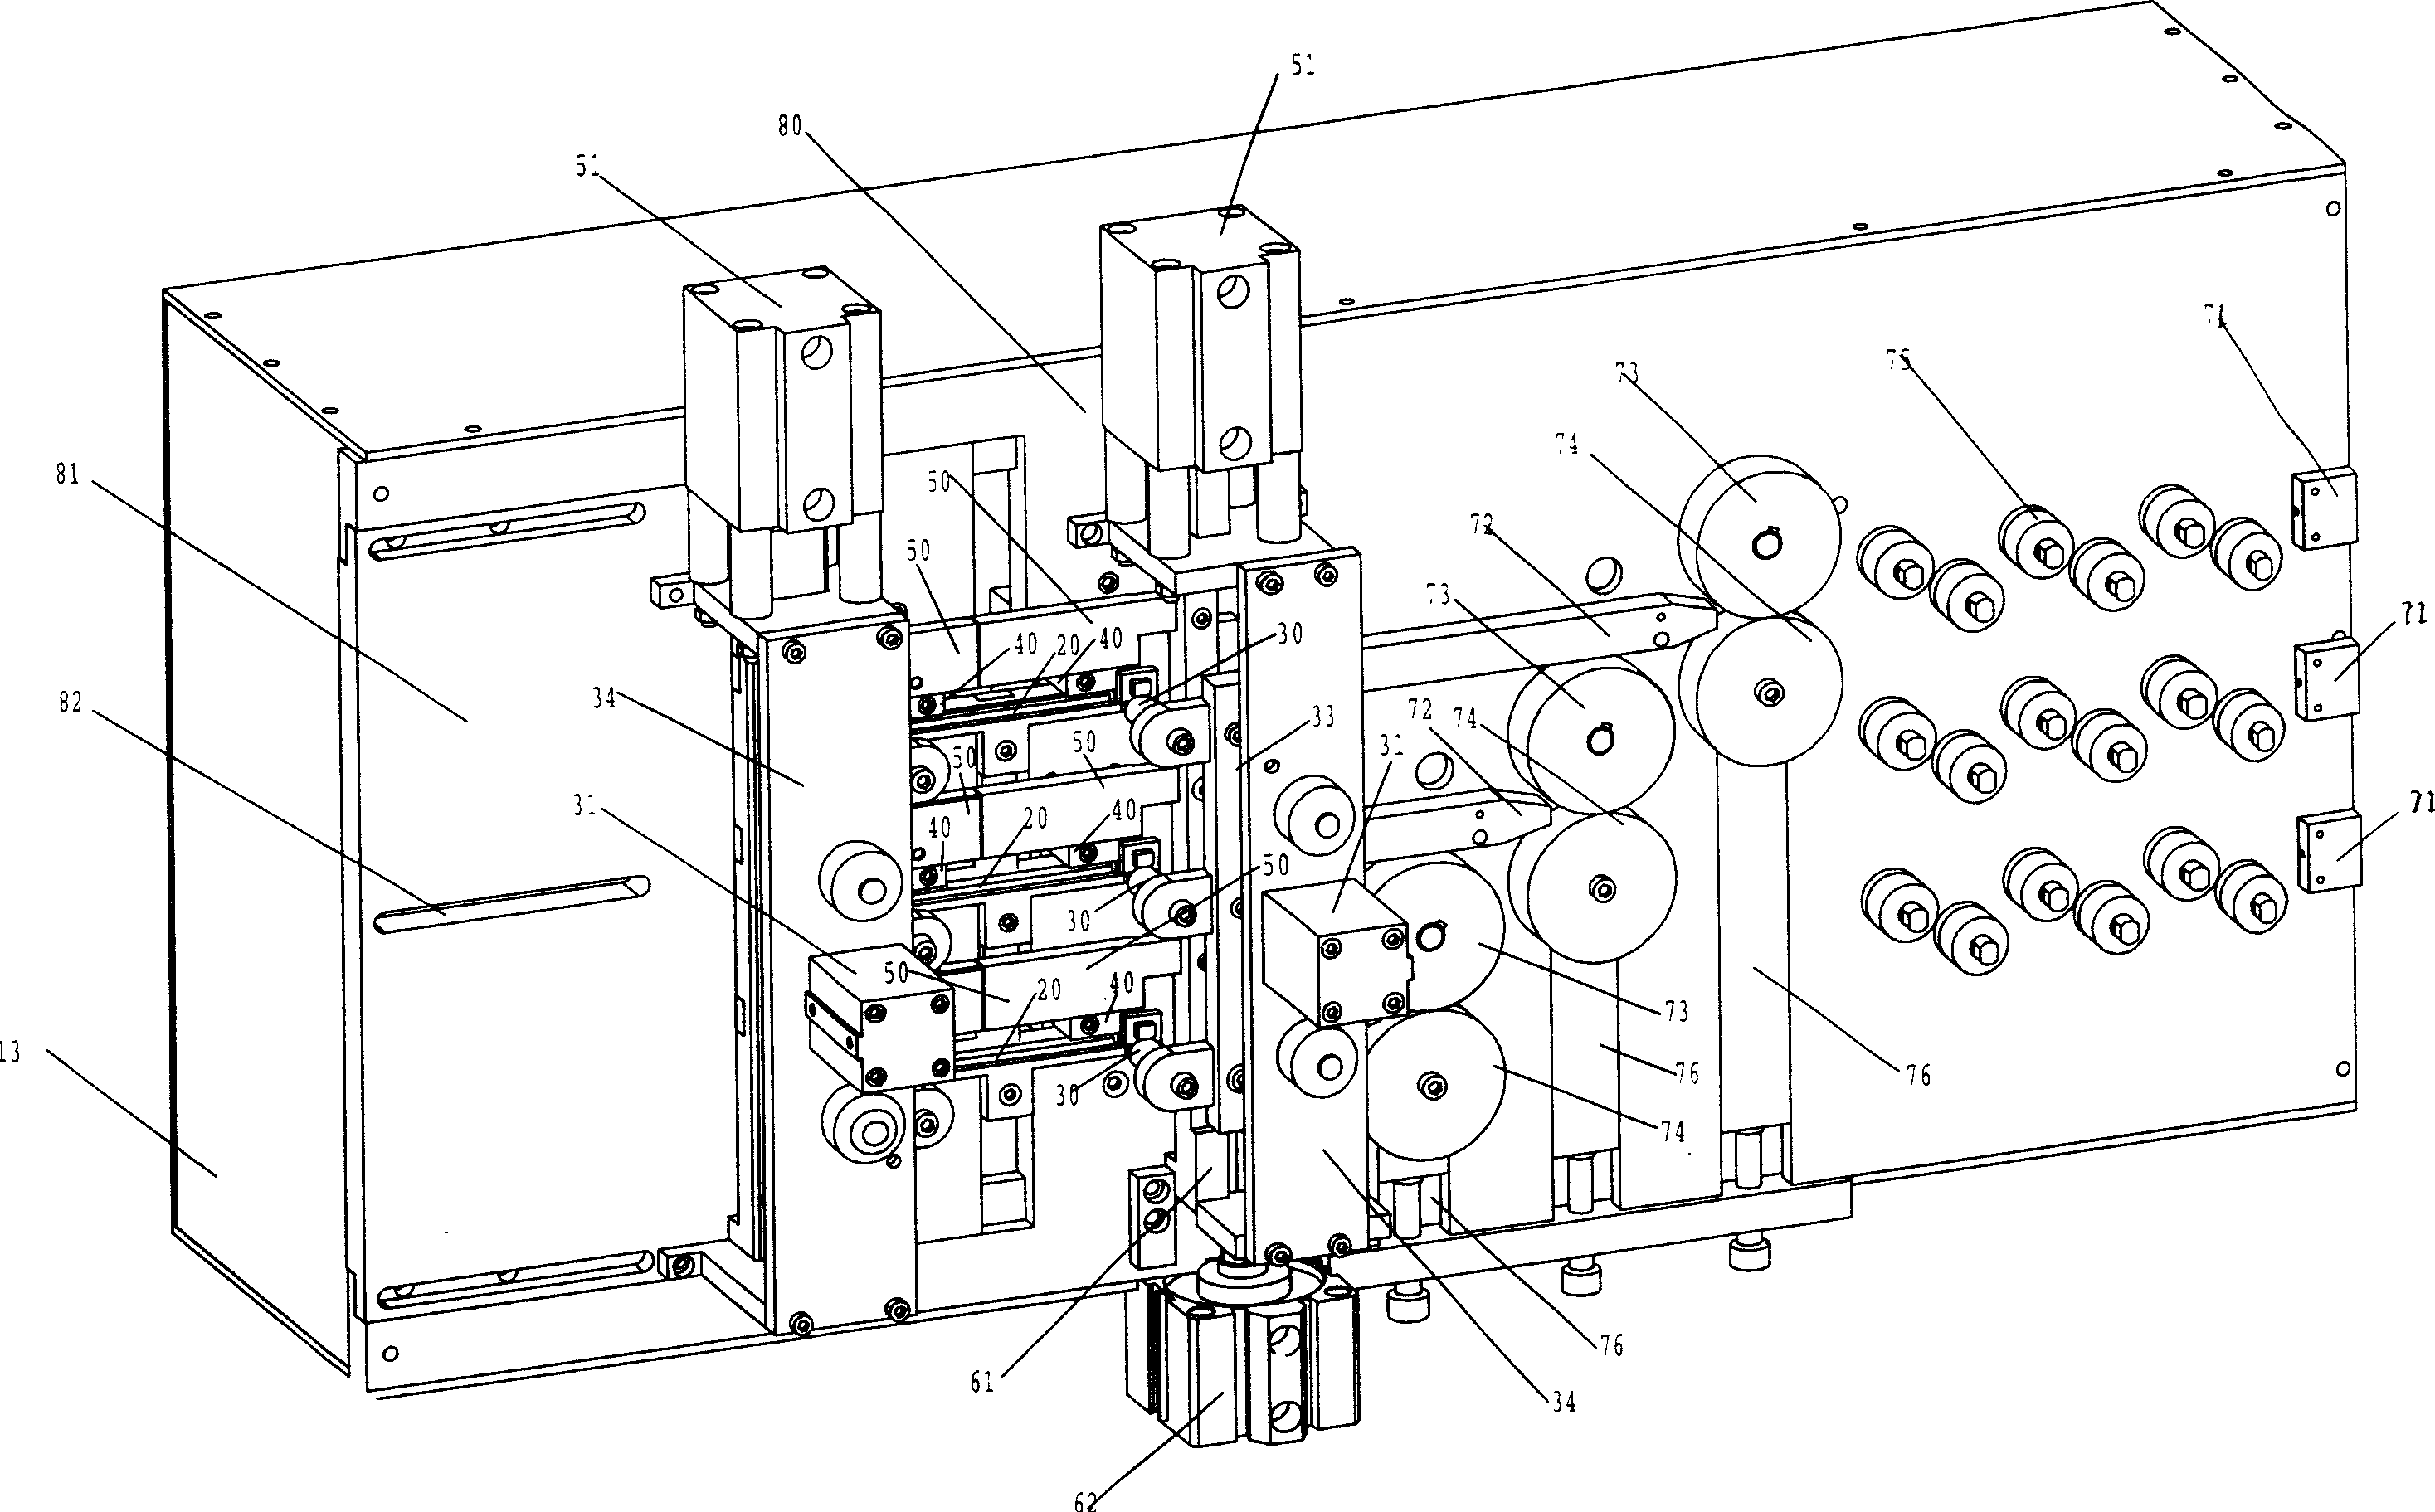 Forming machine for screw thread